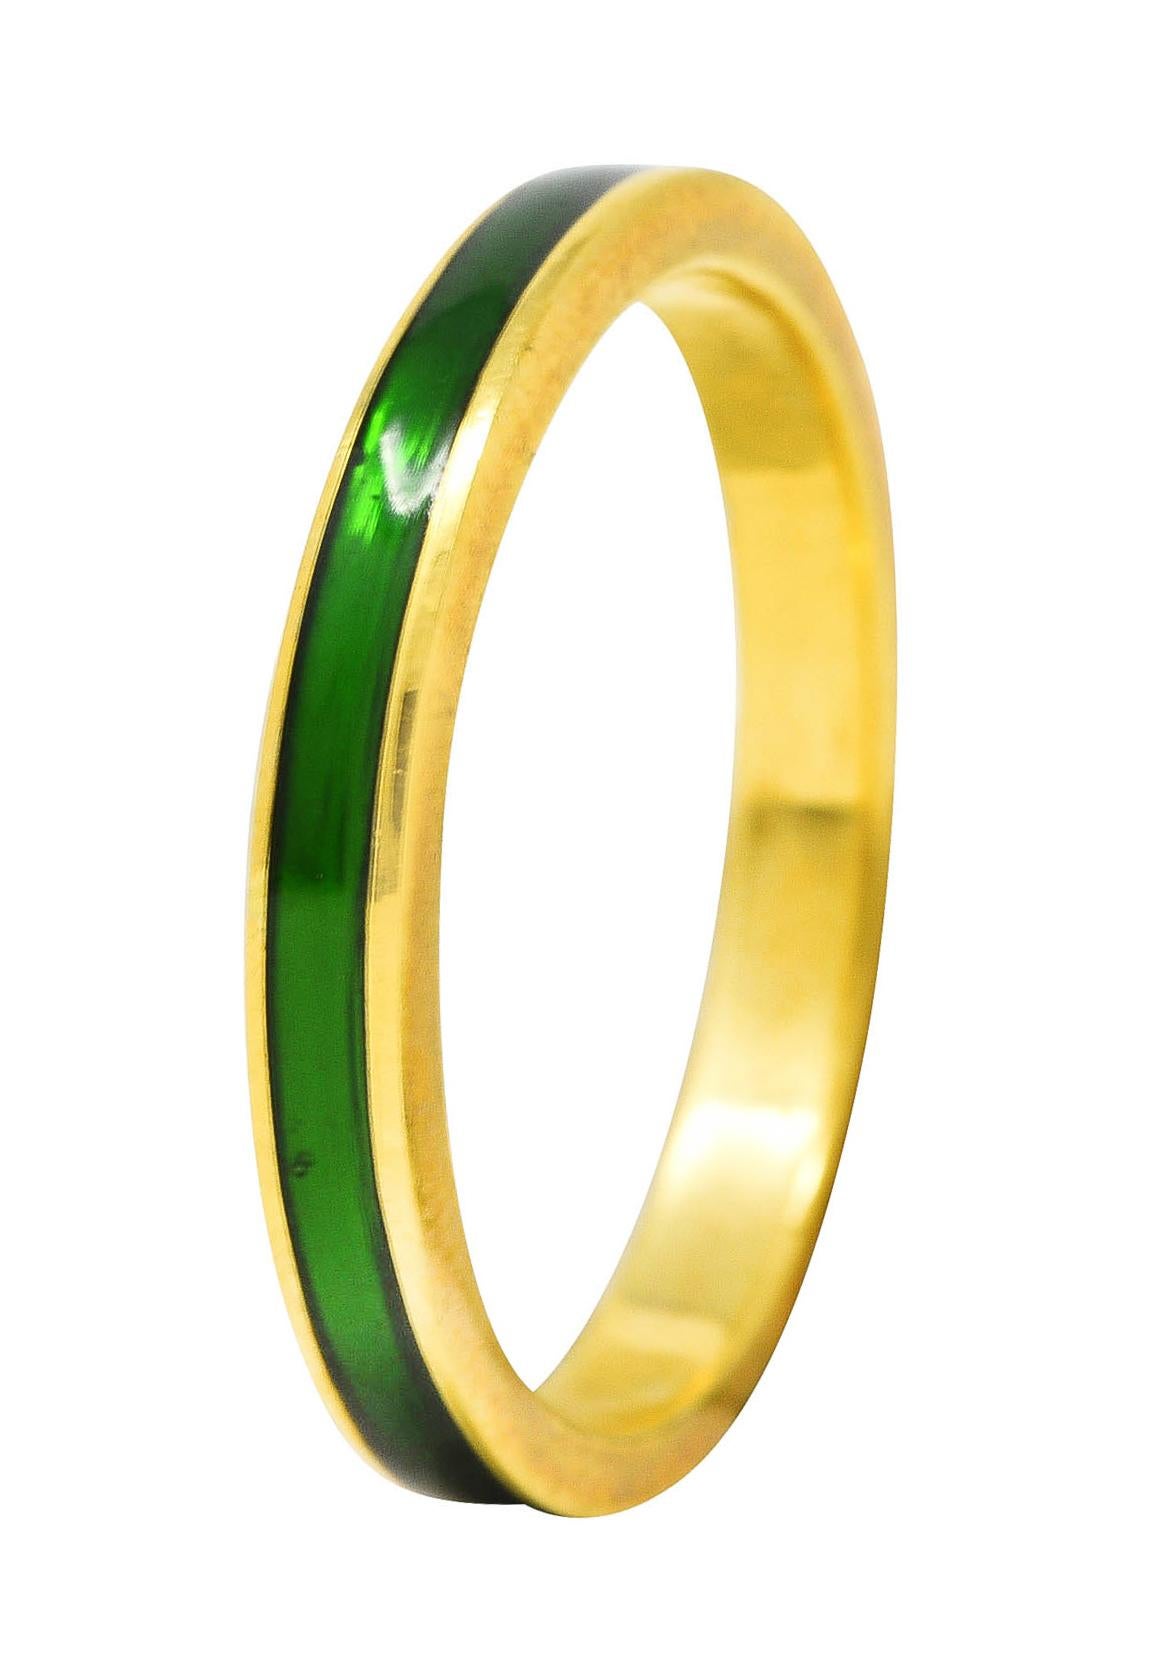 Band ring features a recessed enamel channel fully around. Glossy and transparent medium green in color. With high polished gold surround. Stamped 750 for 18 karat gold. Fully signed with maker's mark for Hidalgo. Circa: 1990's. Ring size: 8 1/4 and